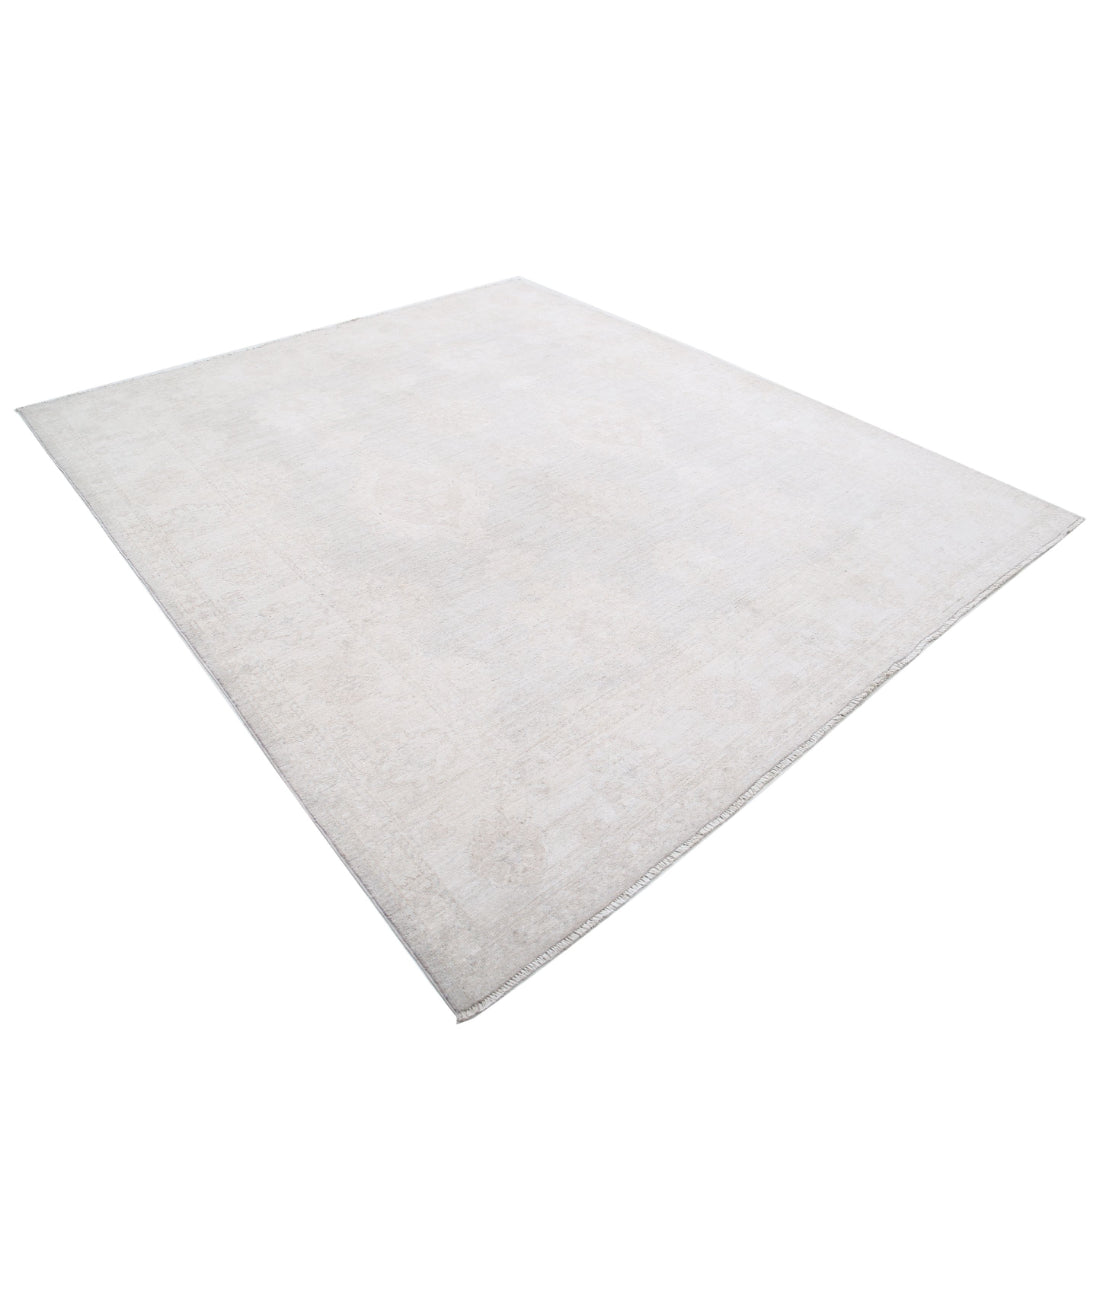 Hand Knotted Oushak Wool Rug - 7'10'' x 9'0'' 7'10'' x 9'0'' (235 X 270) / Grey / Ivory